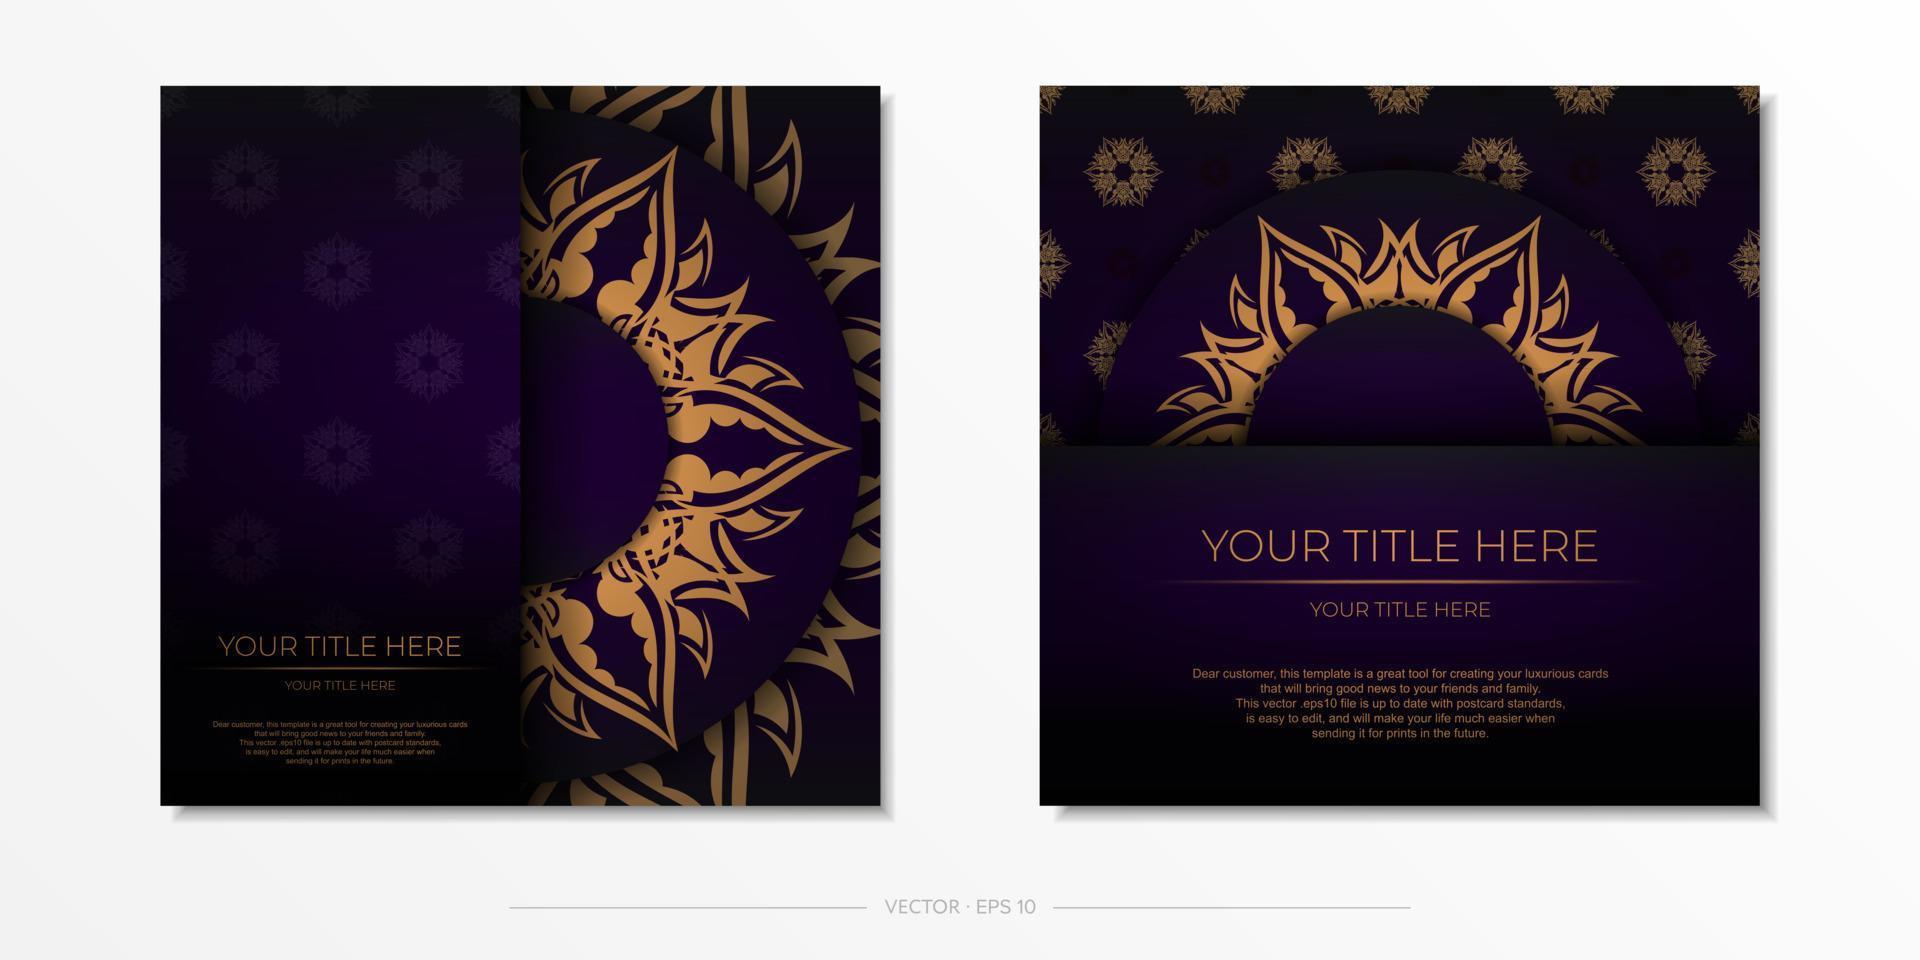 Luxury purple square invitation card template with vintage abstract ornament. Elegant and classic elements are great for decorating. Vector illustration.